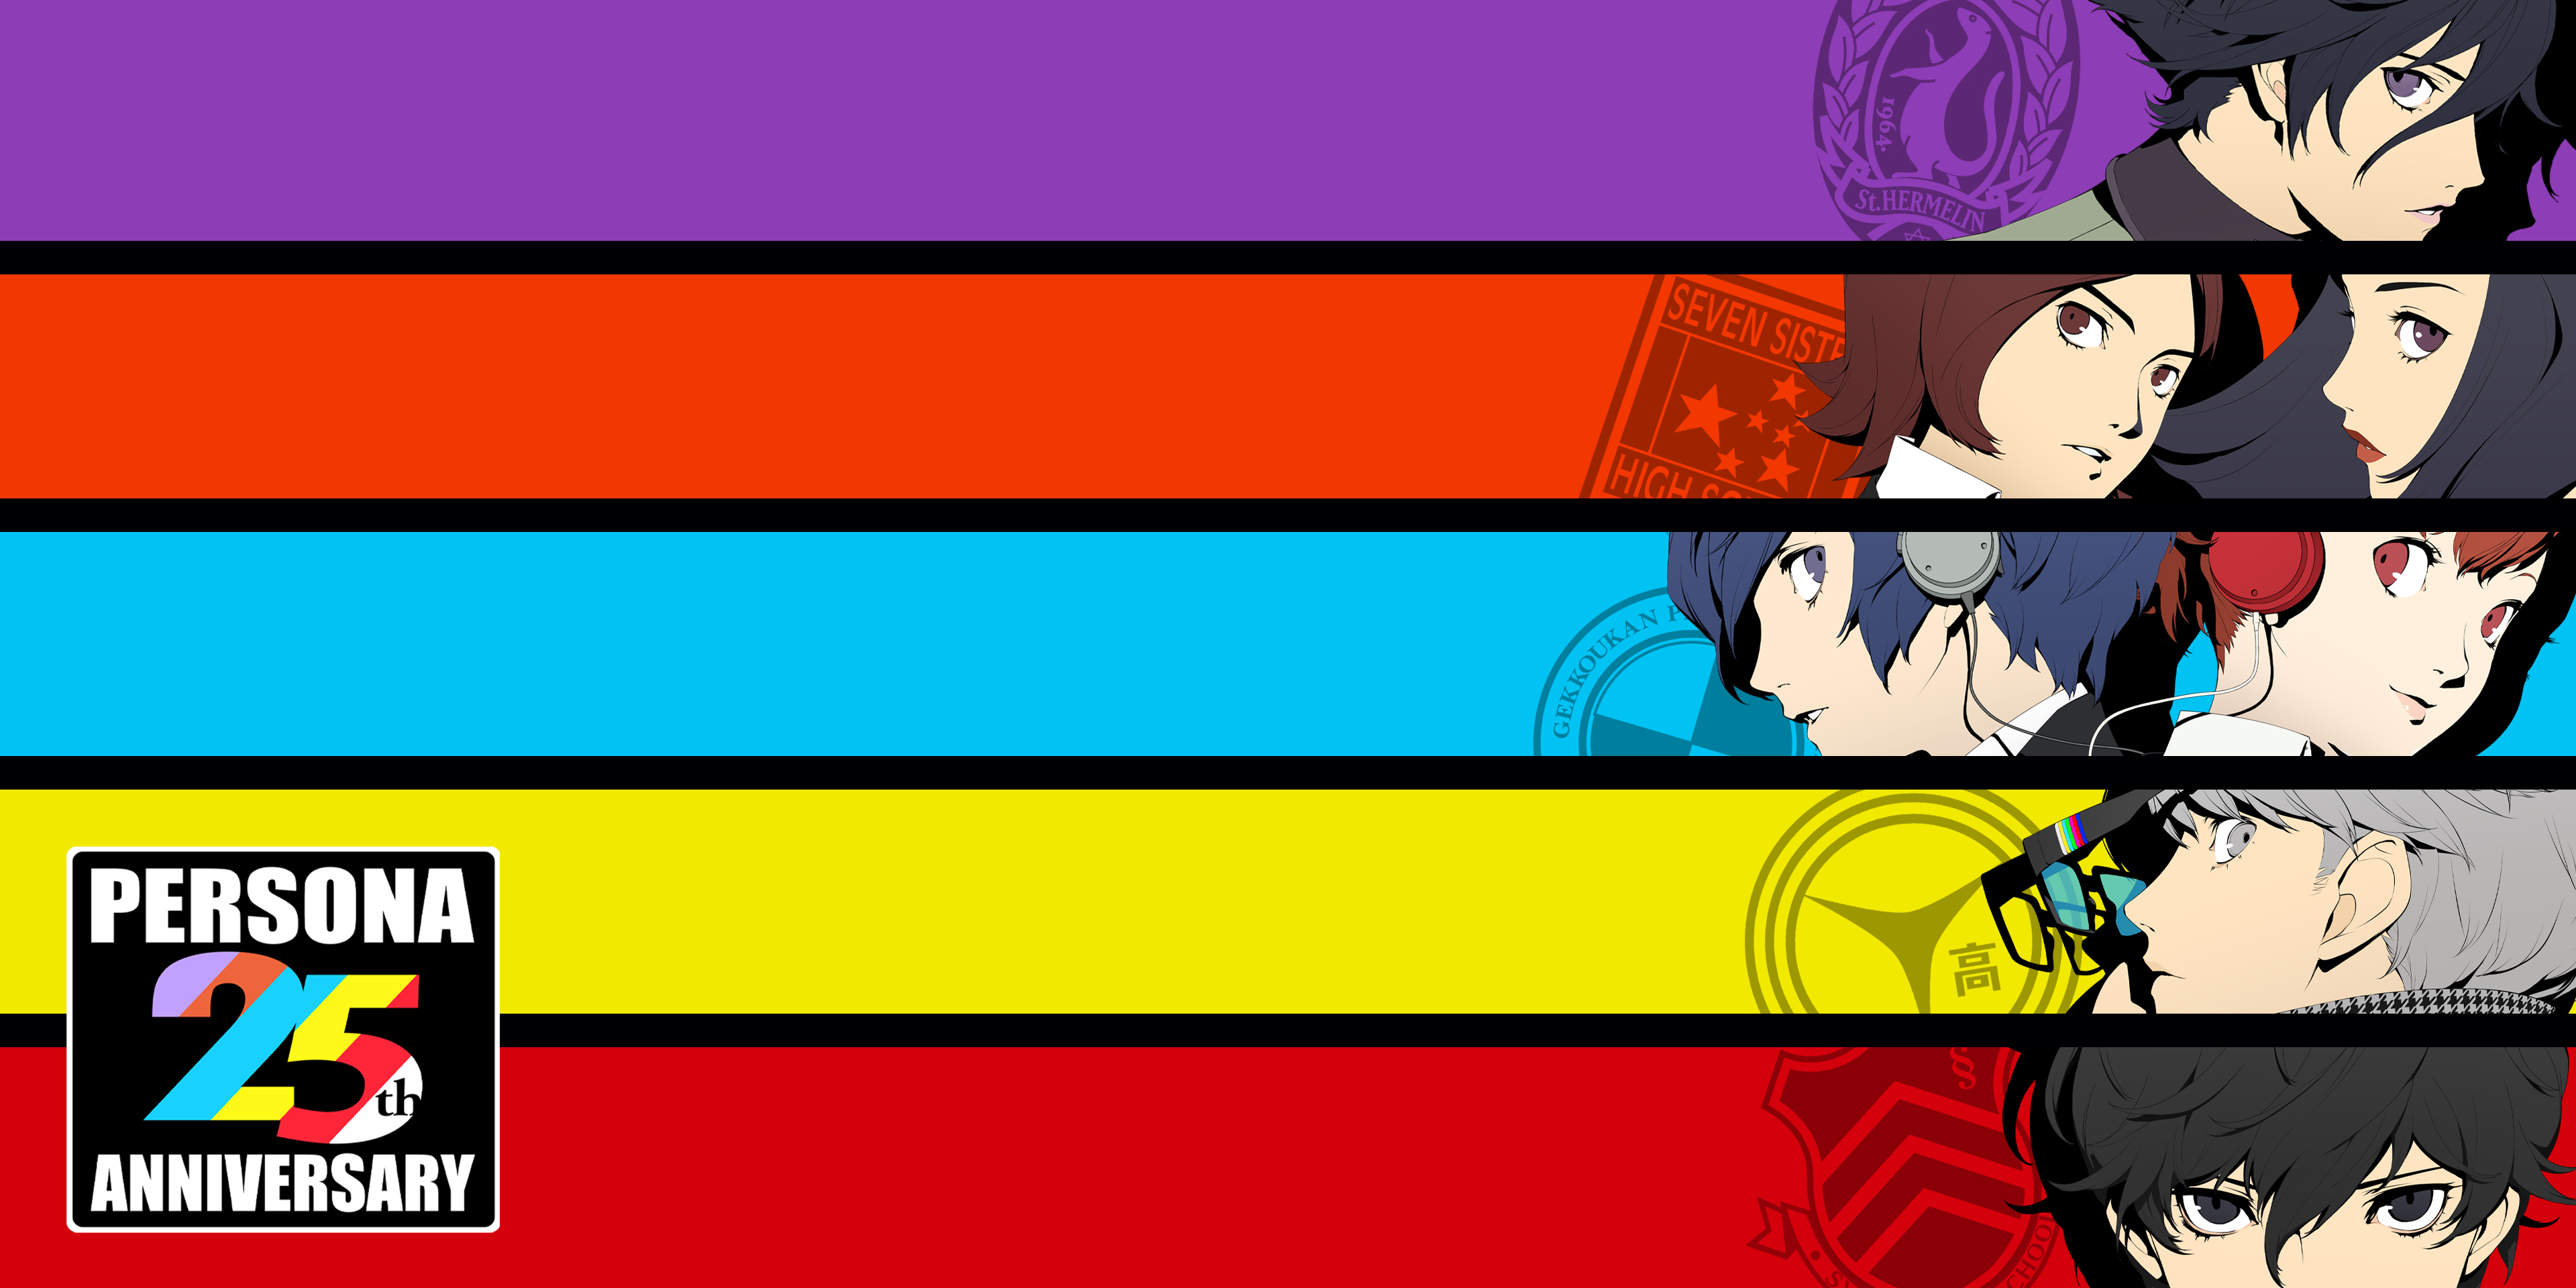 3840x1920 Persona 25th anniversary wallpapers, but i illegally edited out the annoying copyright watermark : r/Persona5